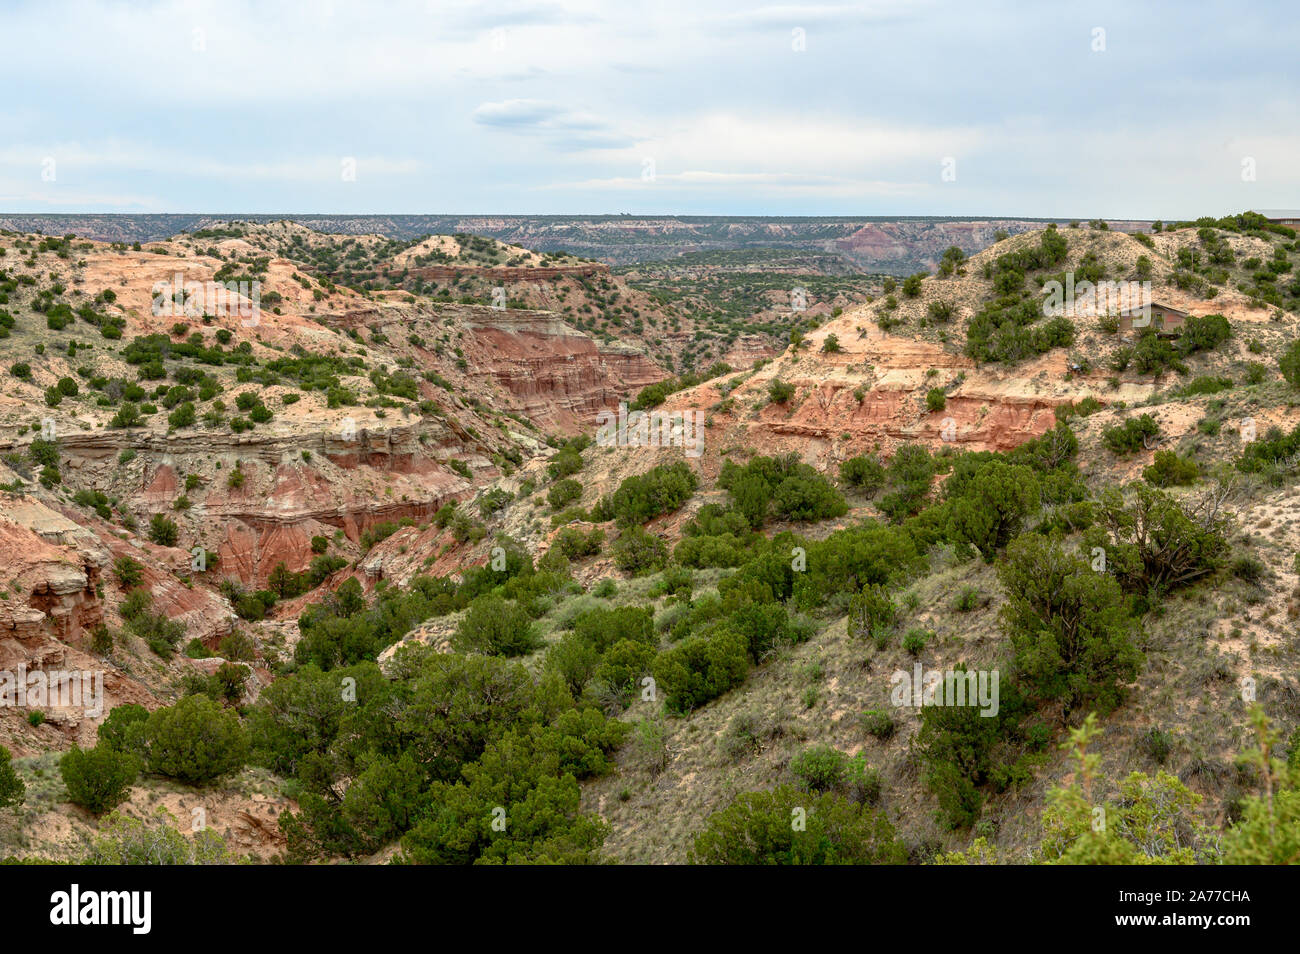 Palo Duro Canyon State Park in the Texas Panhandle near Amarillo and the town of Canyon, Texas Stock Photo